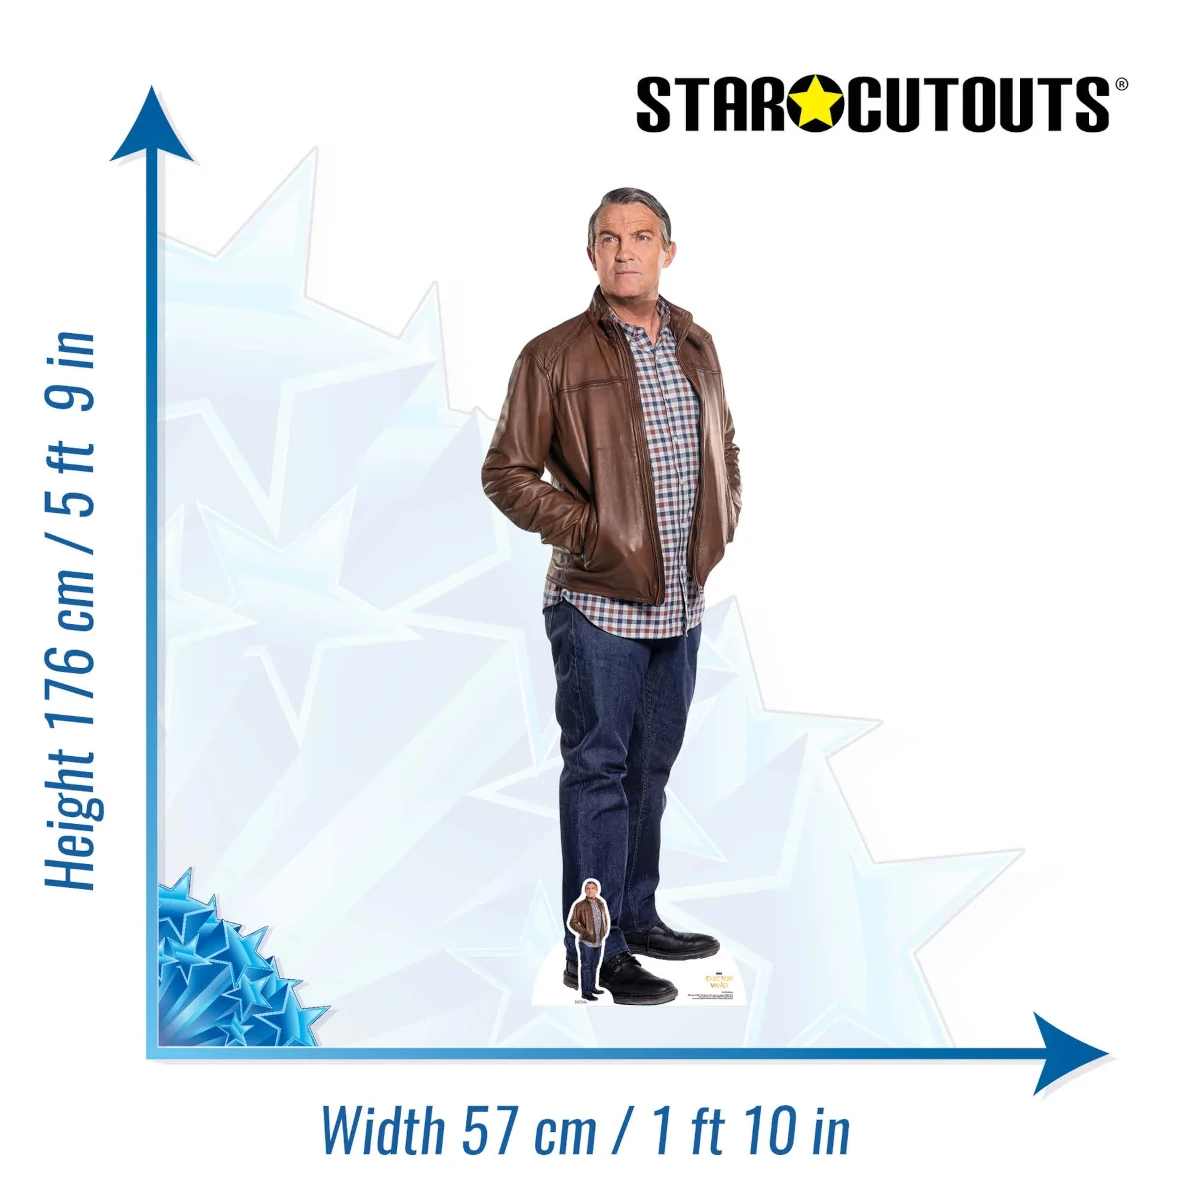 SC1200 Graham O'Brien 'Bradley Walsh' (Doctor Who) Official Lifesize + Mini Cardboard Cutout Standee Size